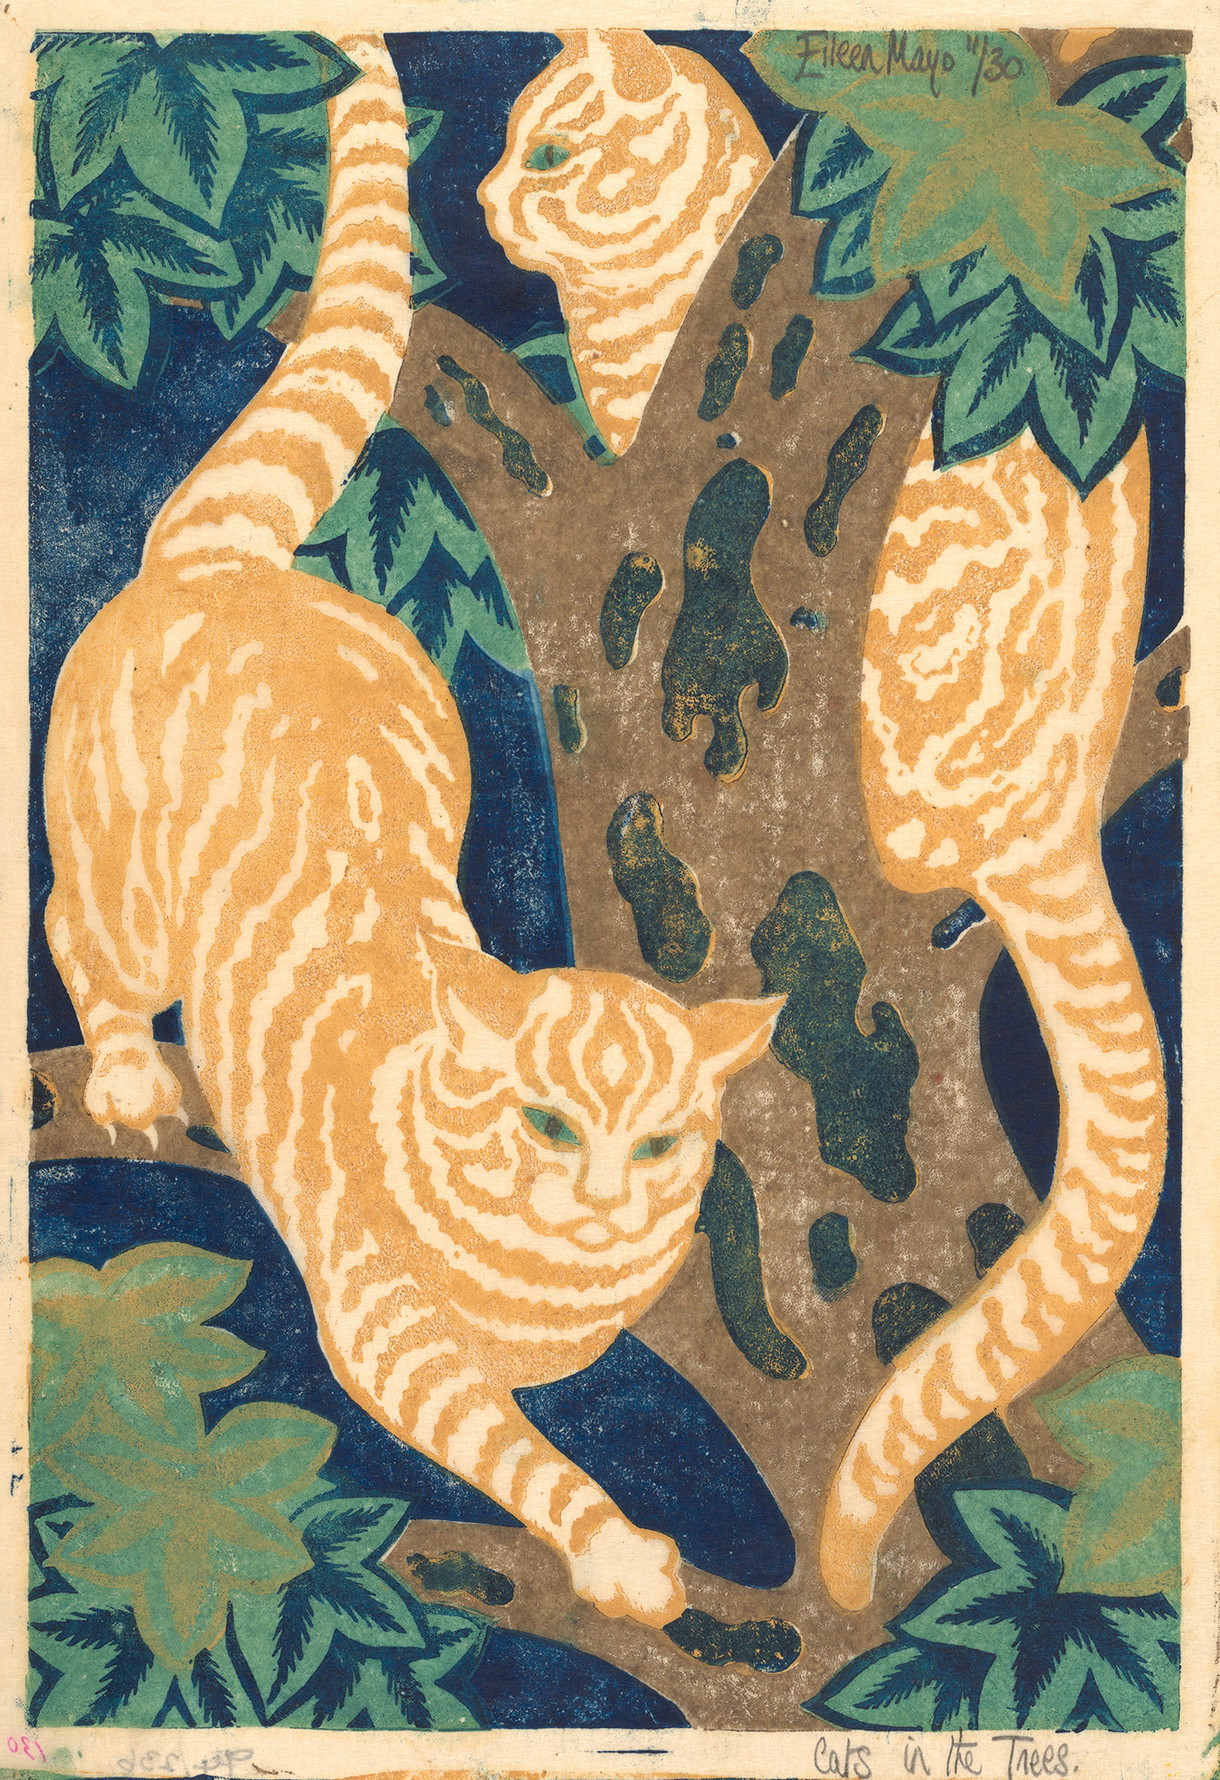 Colouring in: Cats in the Trees